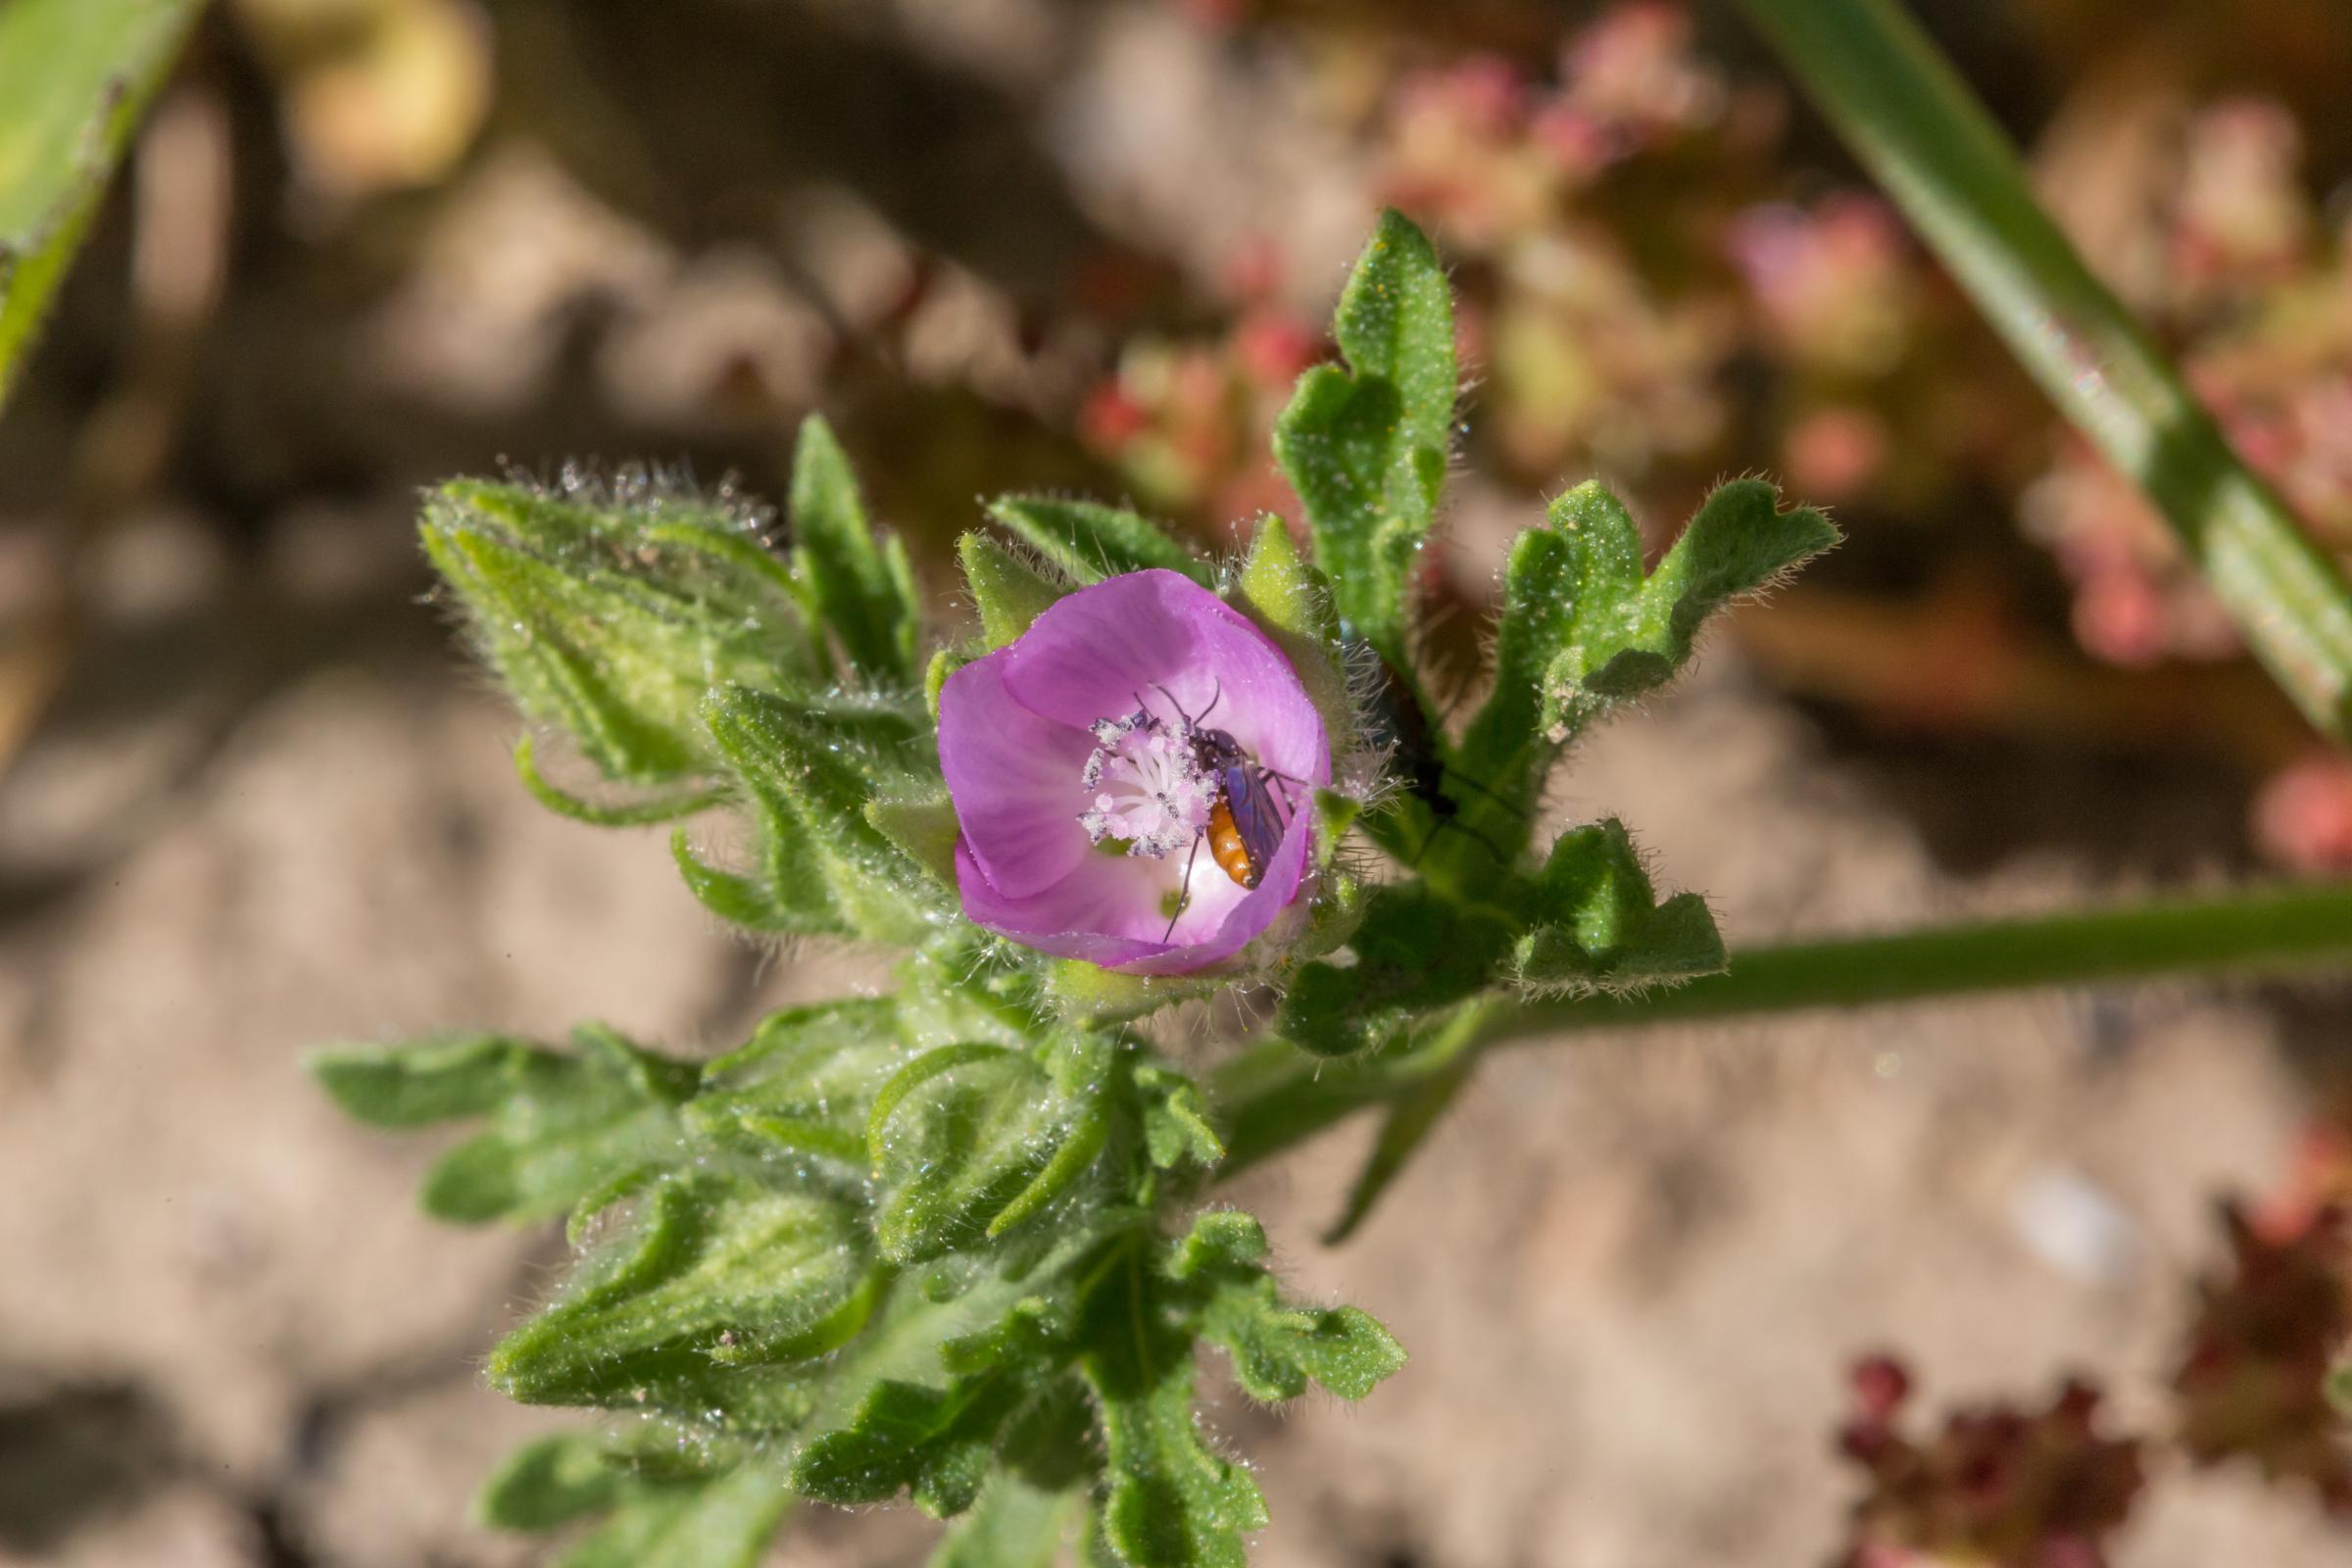 Rare Flower Discovered In Channel Islands | KCLU